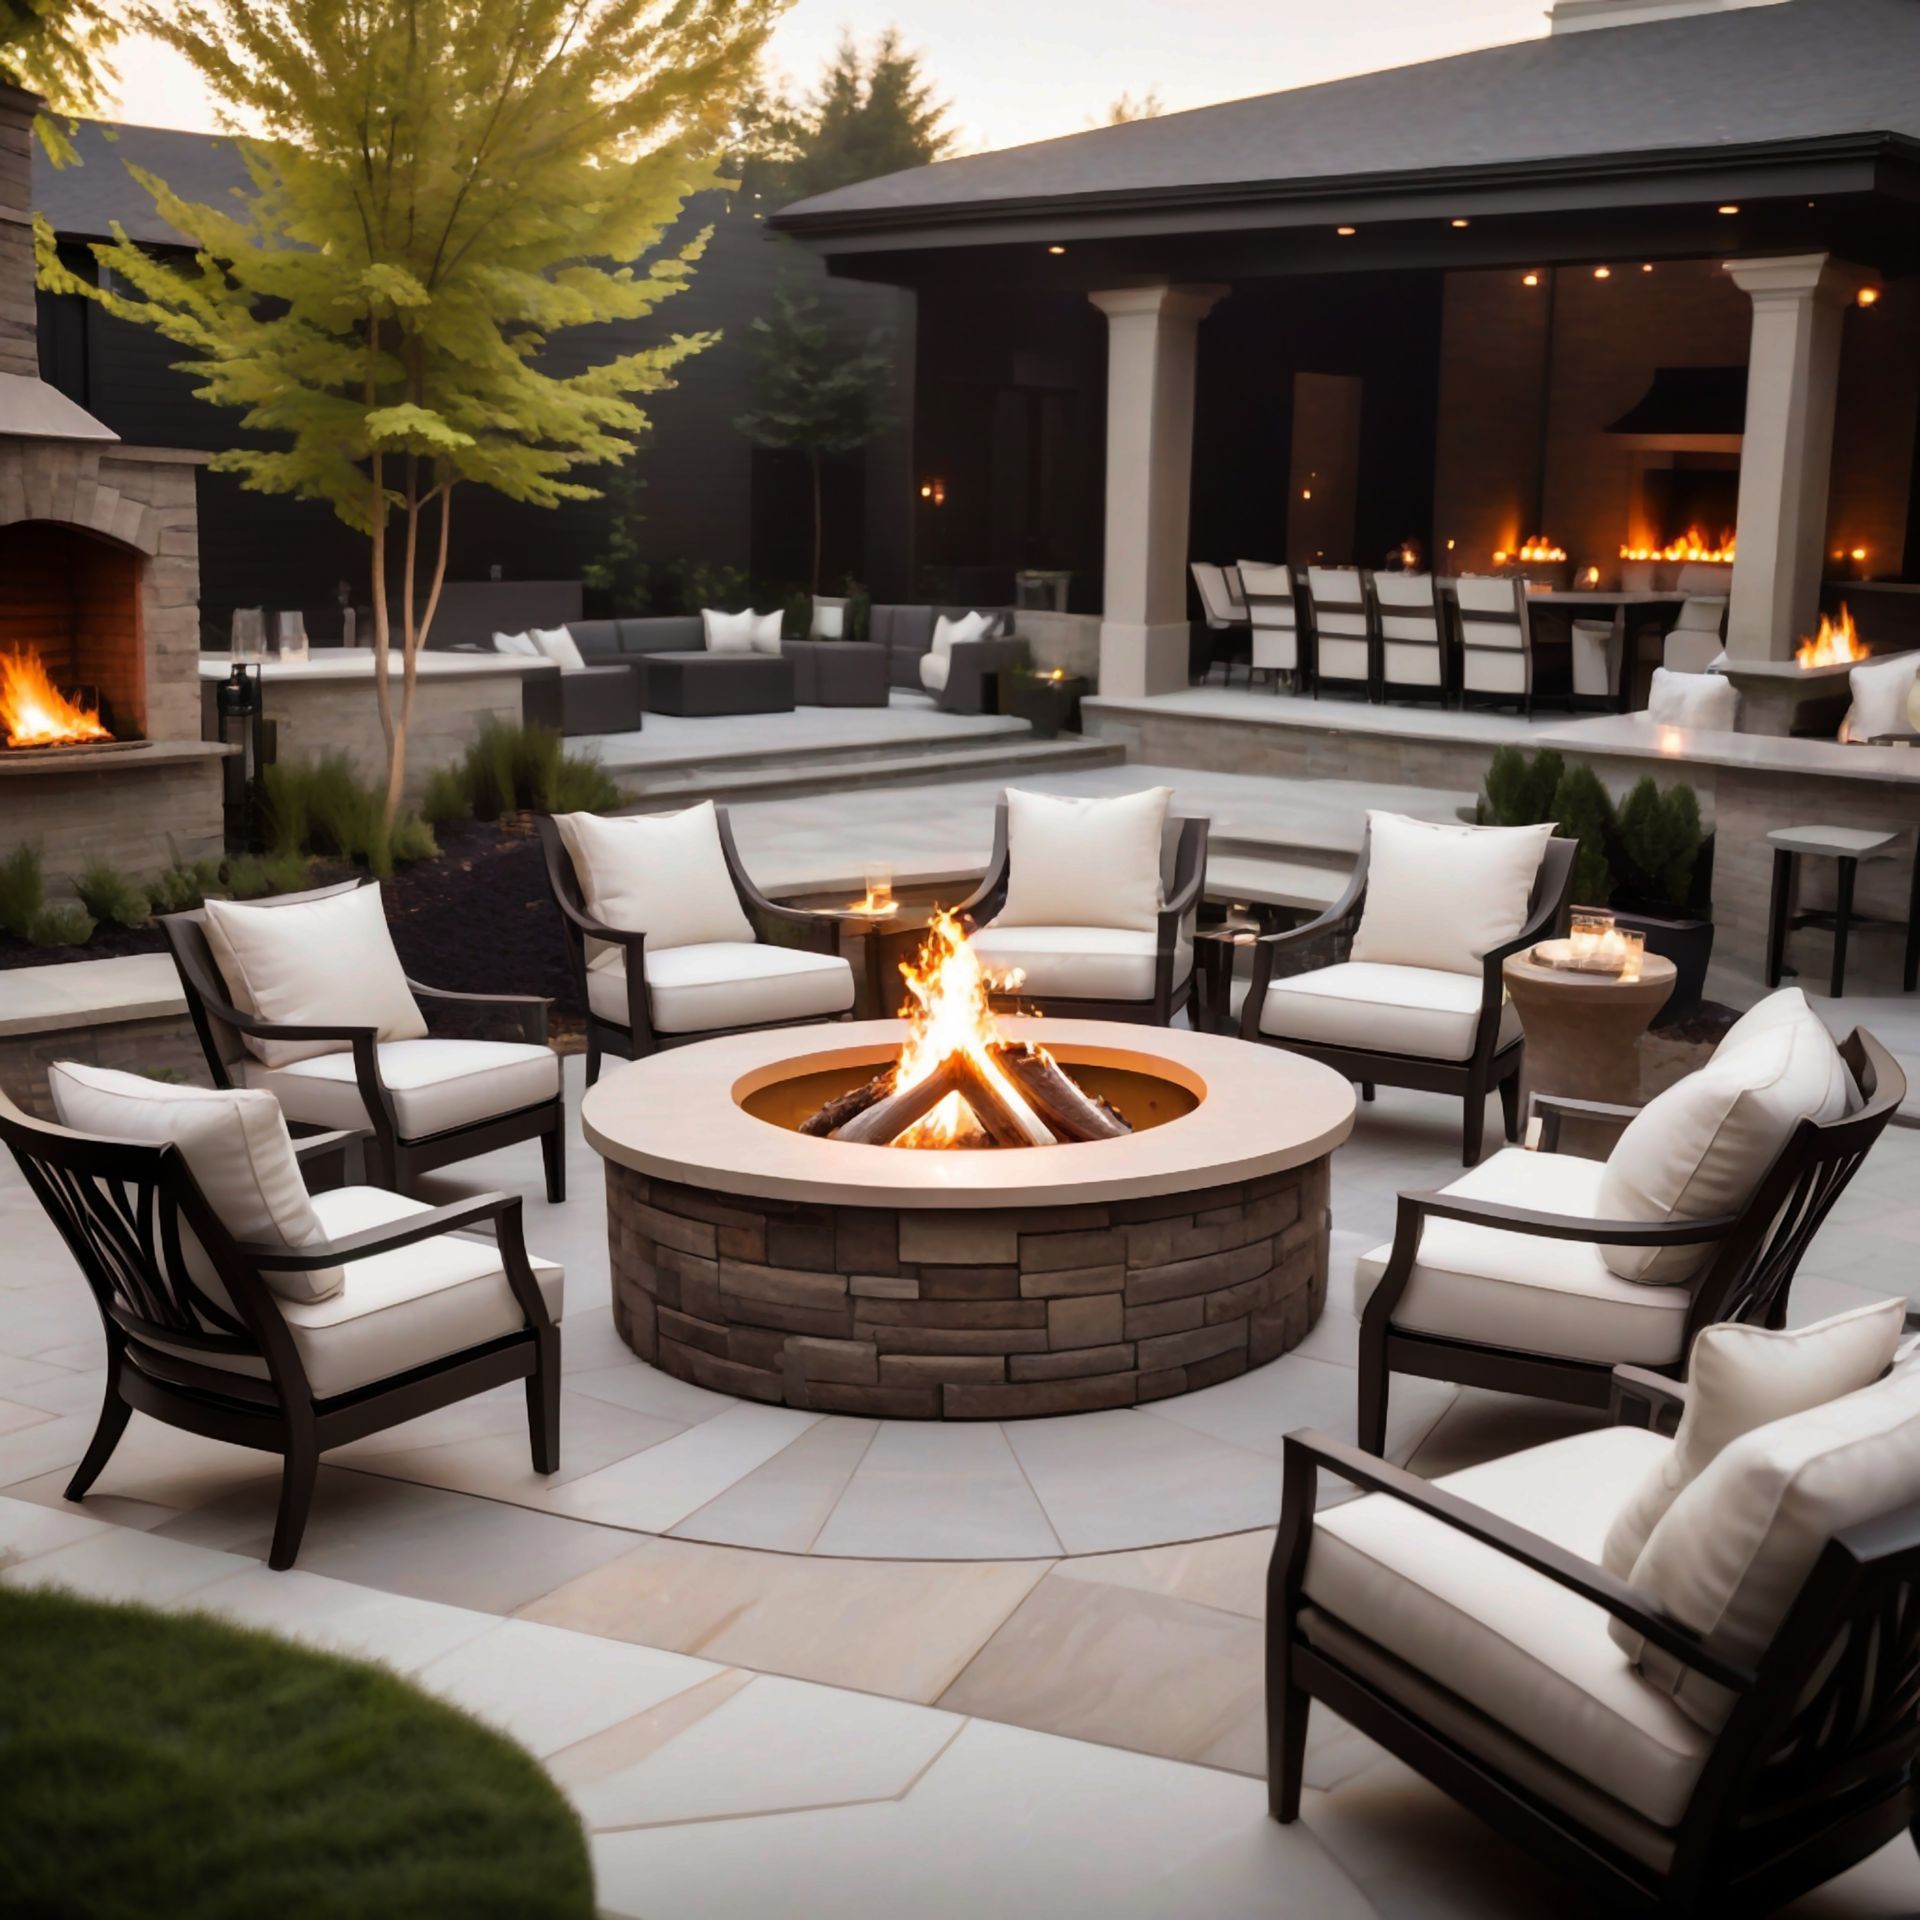 a fire pit is surrounded by chairs and a fireplace